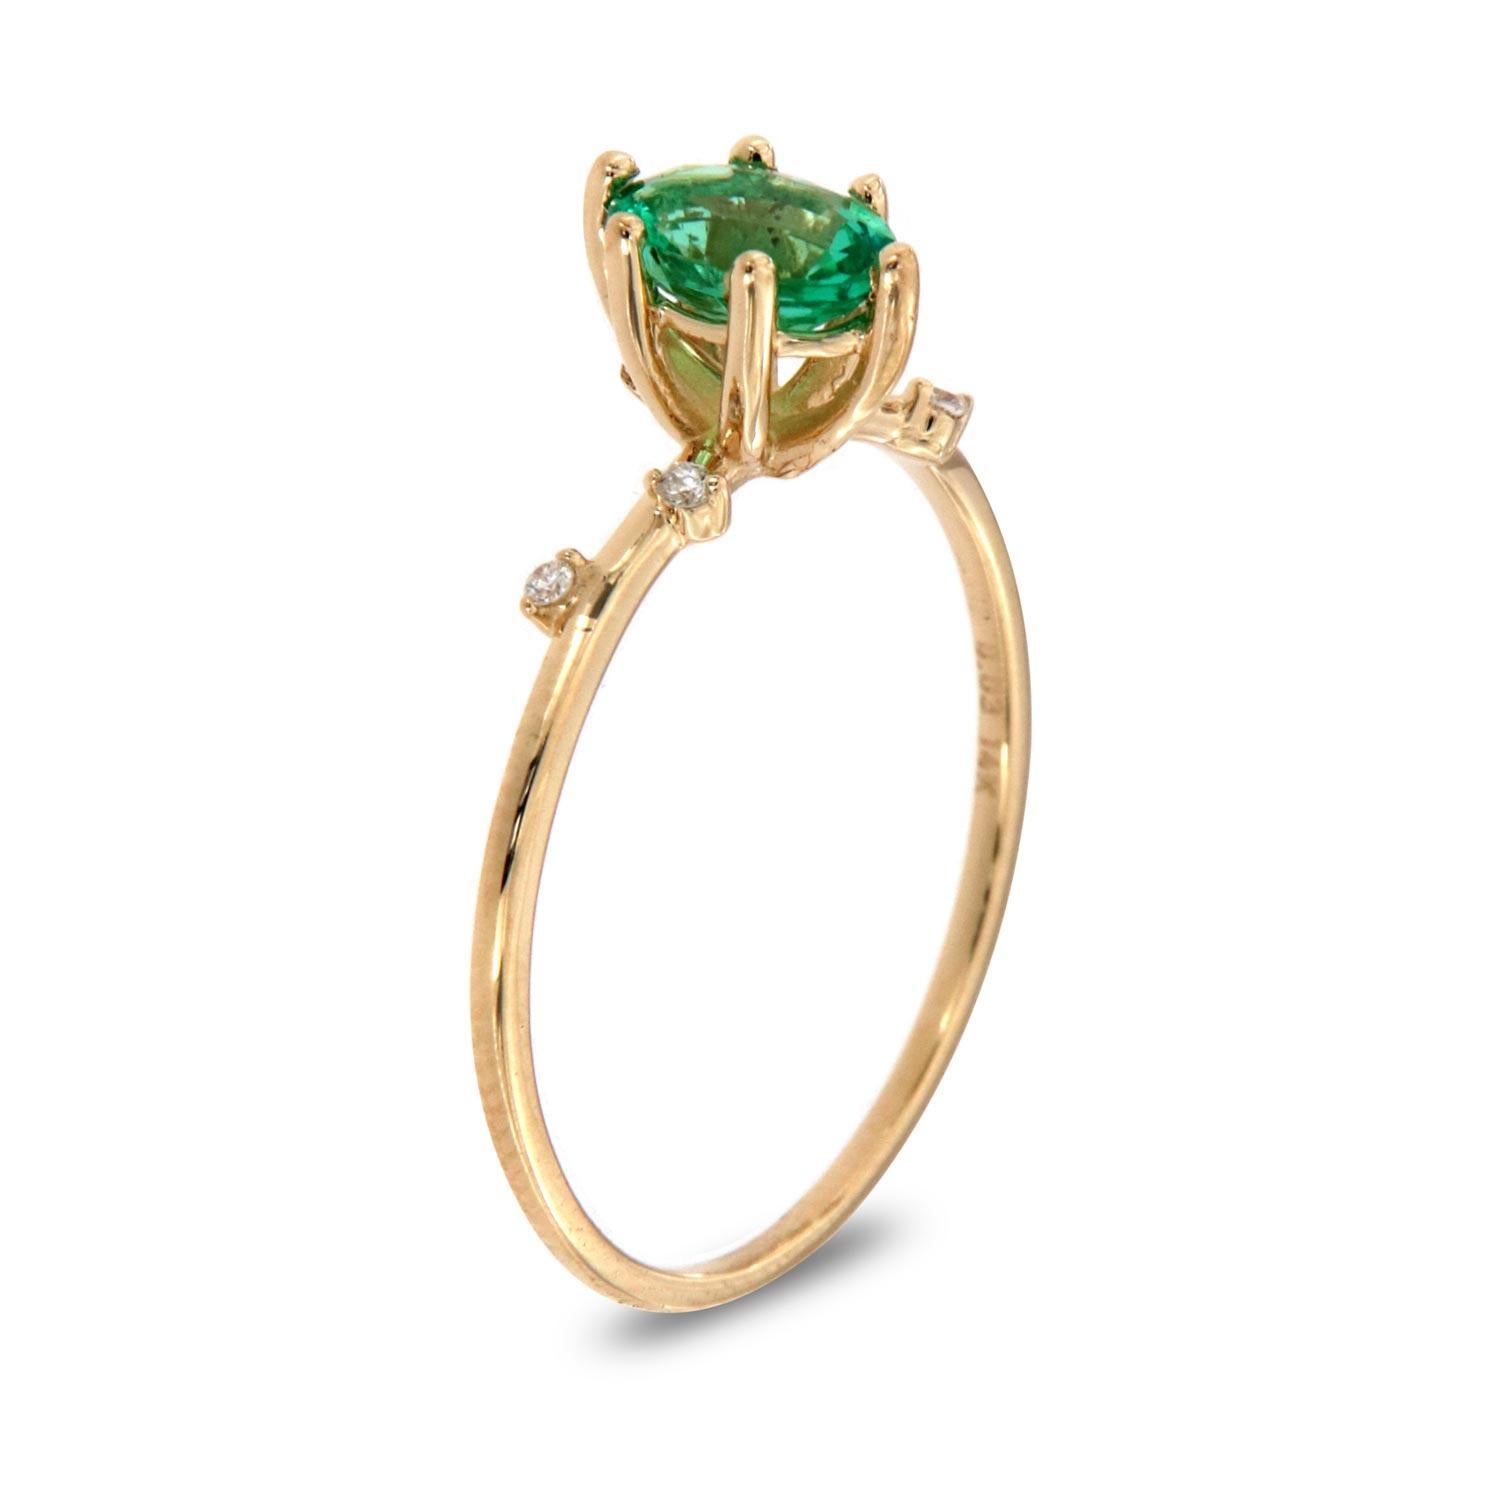 This petite fashion ring is impressive in its vintage appeal, featuring a natural green oval emerald, accented with scattered round brilliant diamonds. Experience the difference in person!

Product details: 

Center Gemstone Type: Emerald
Center